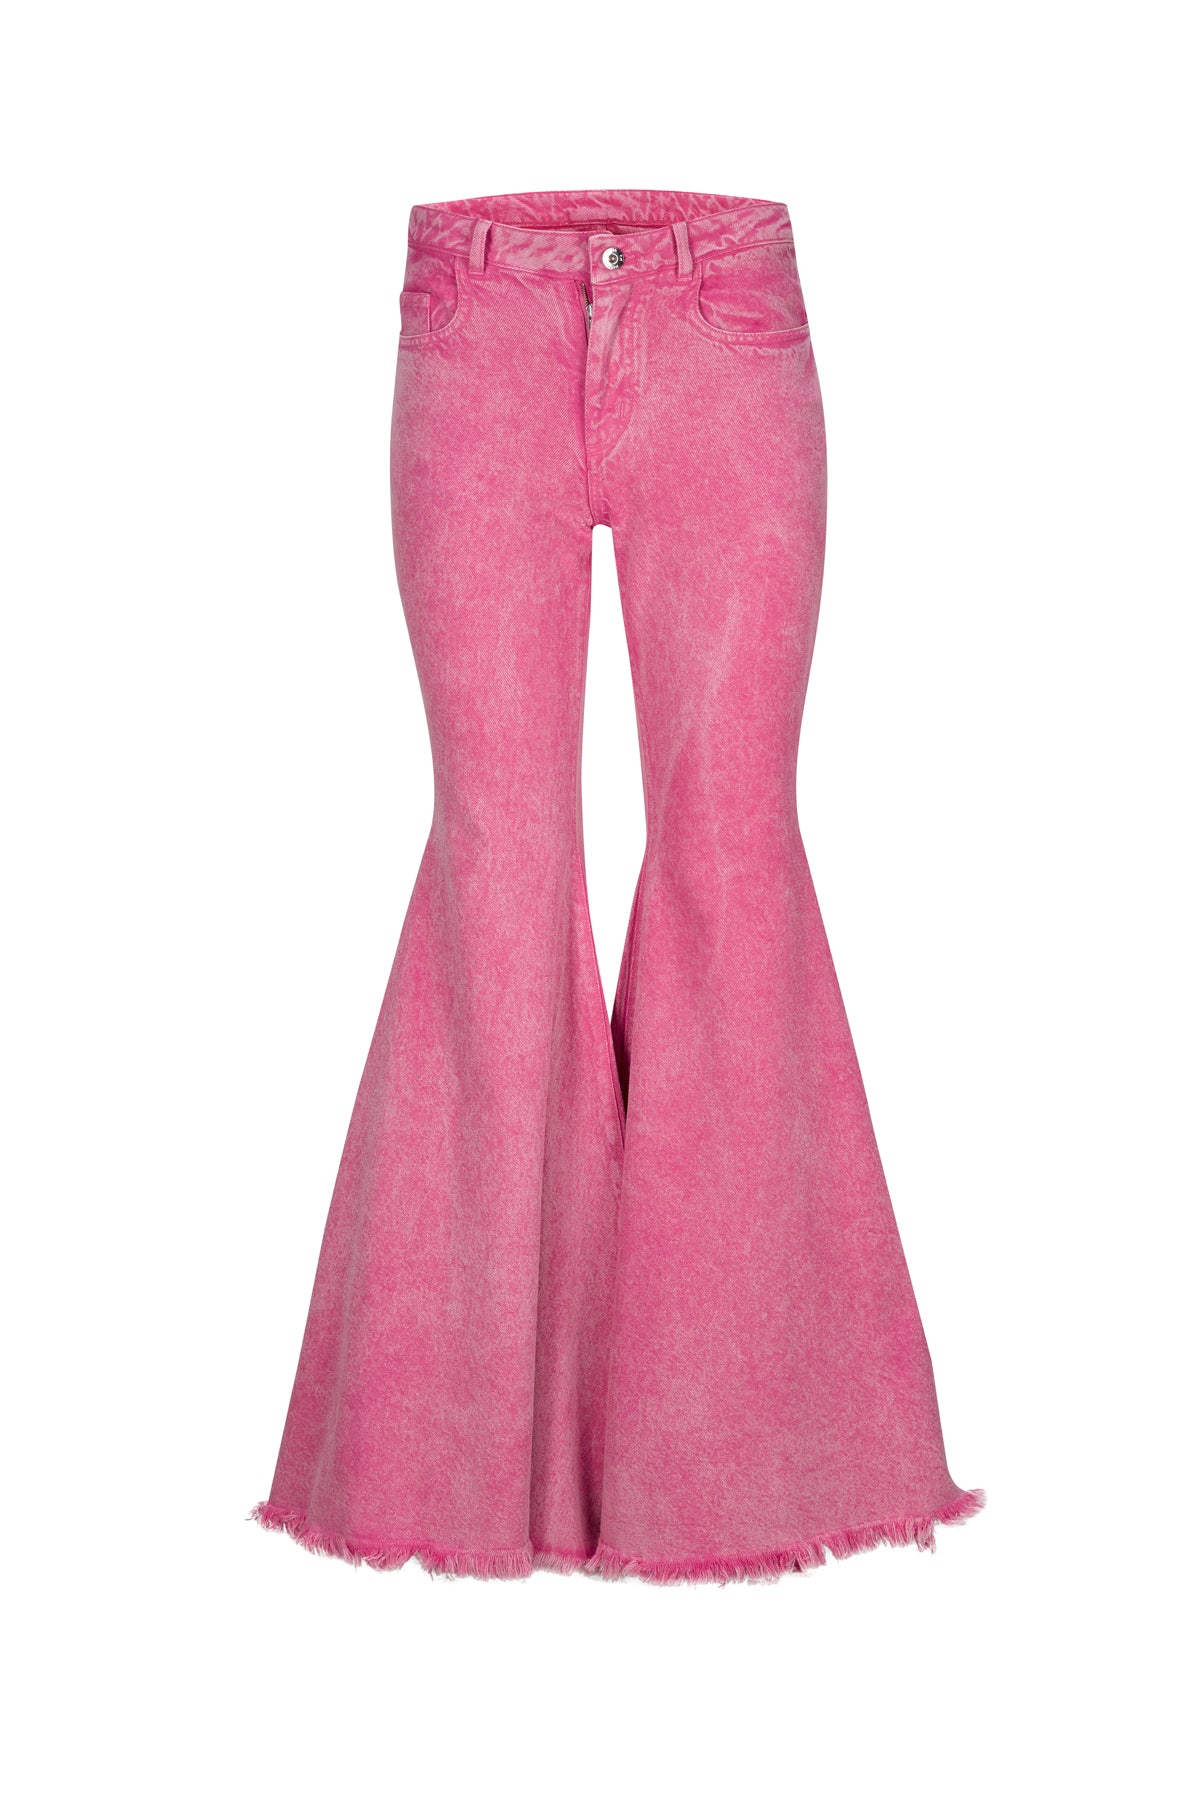 PINK EXTREME FLARES TROUSERS marques almeida